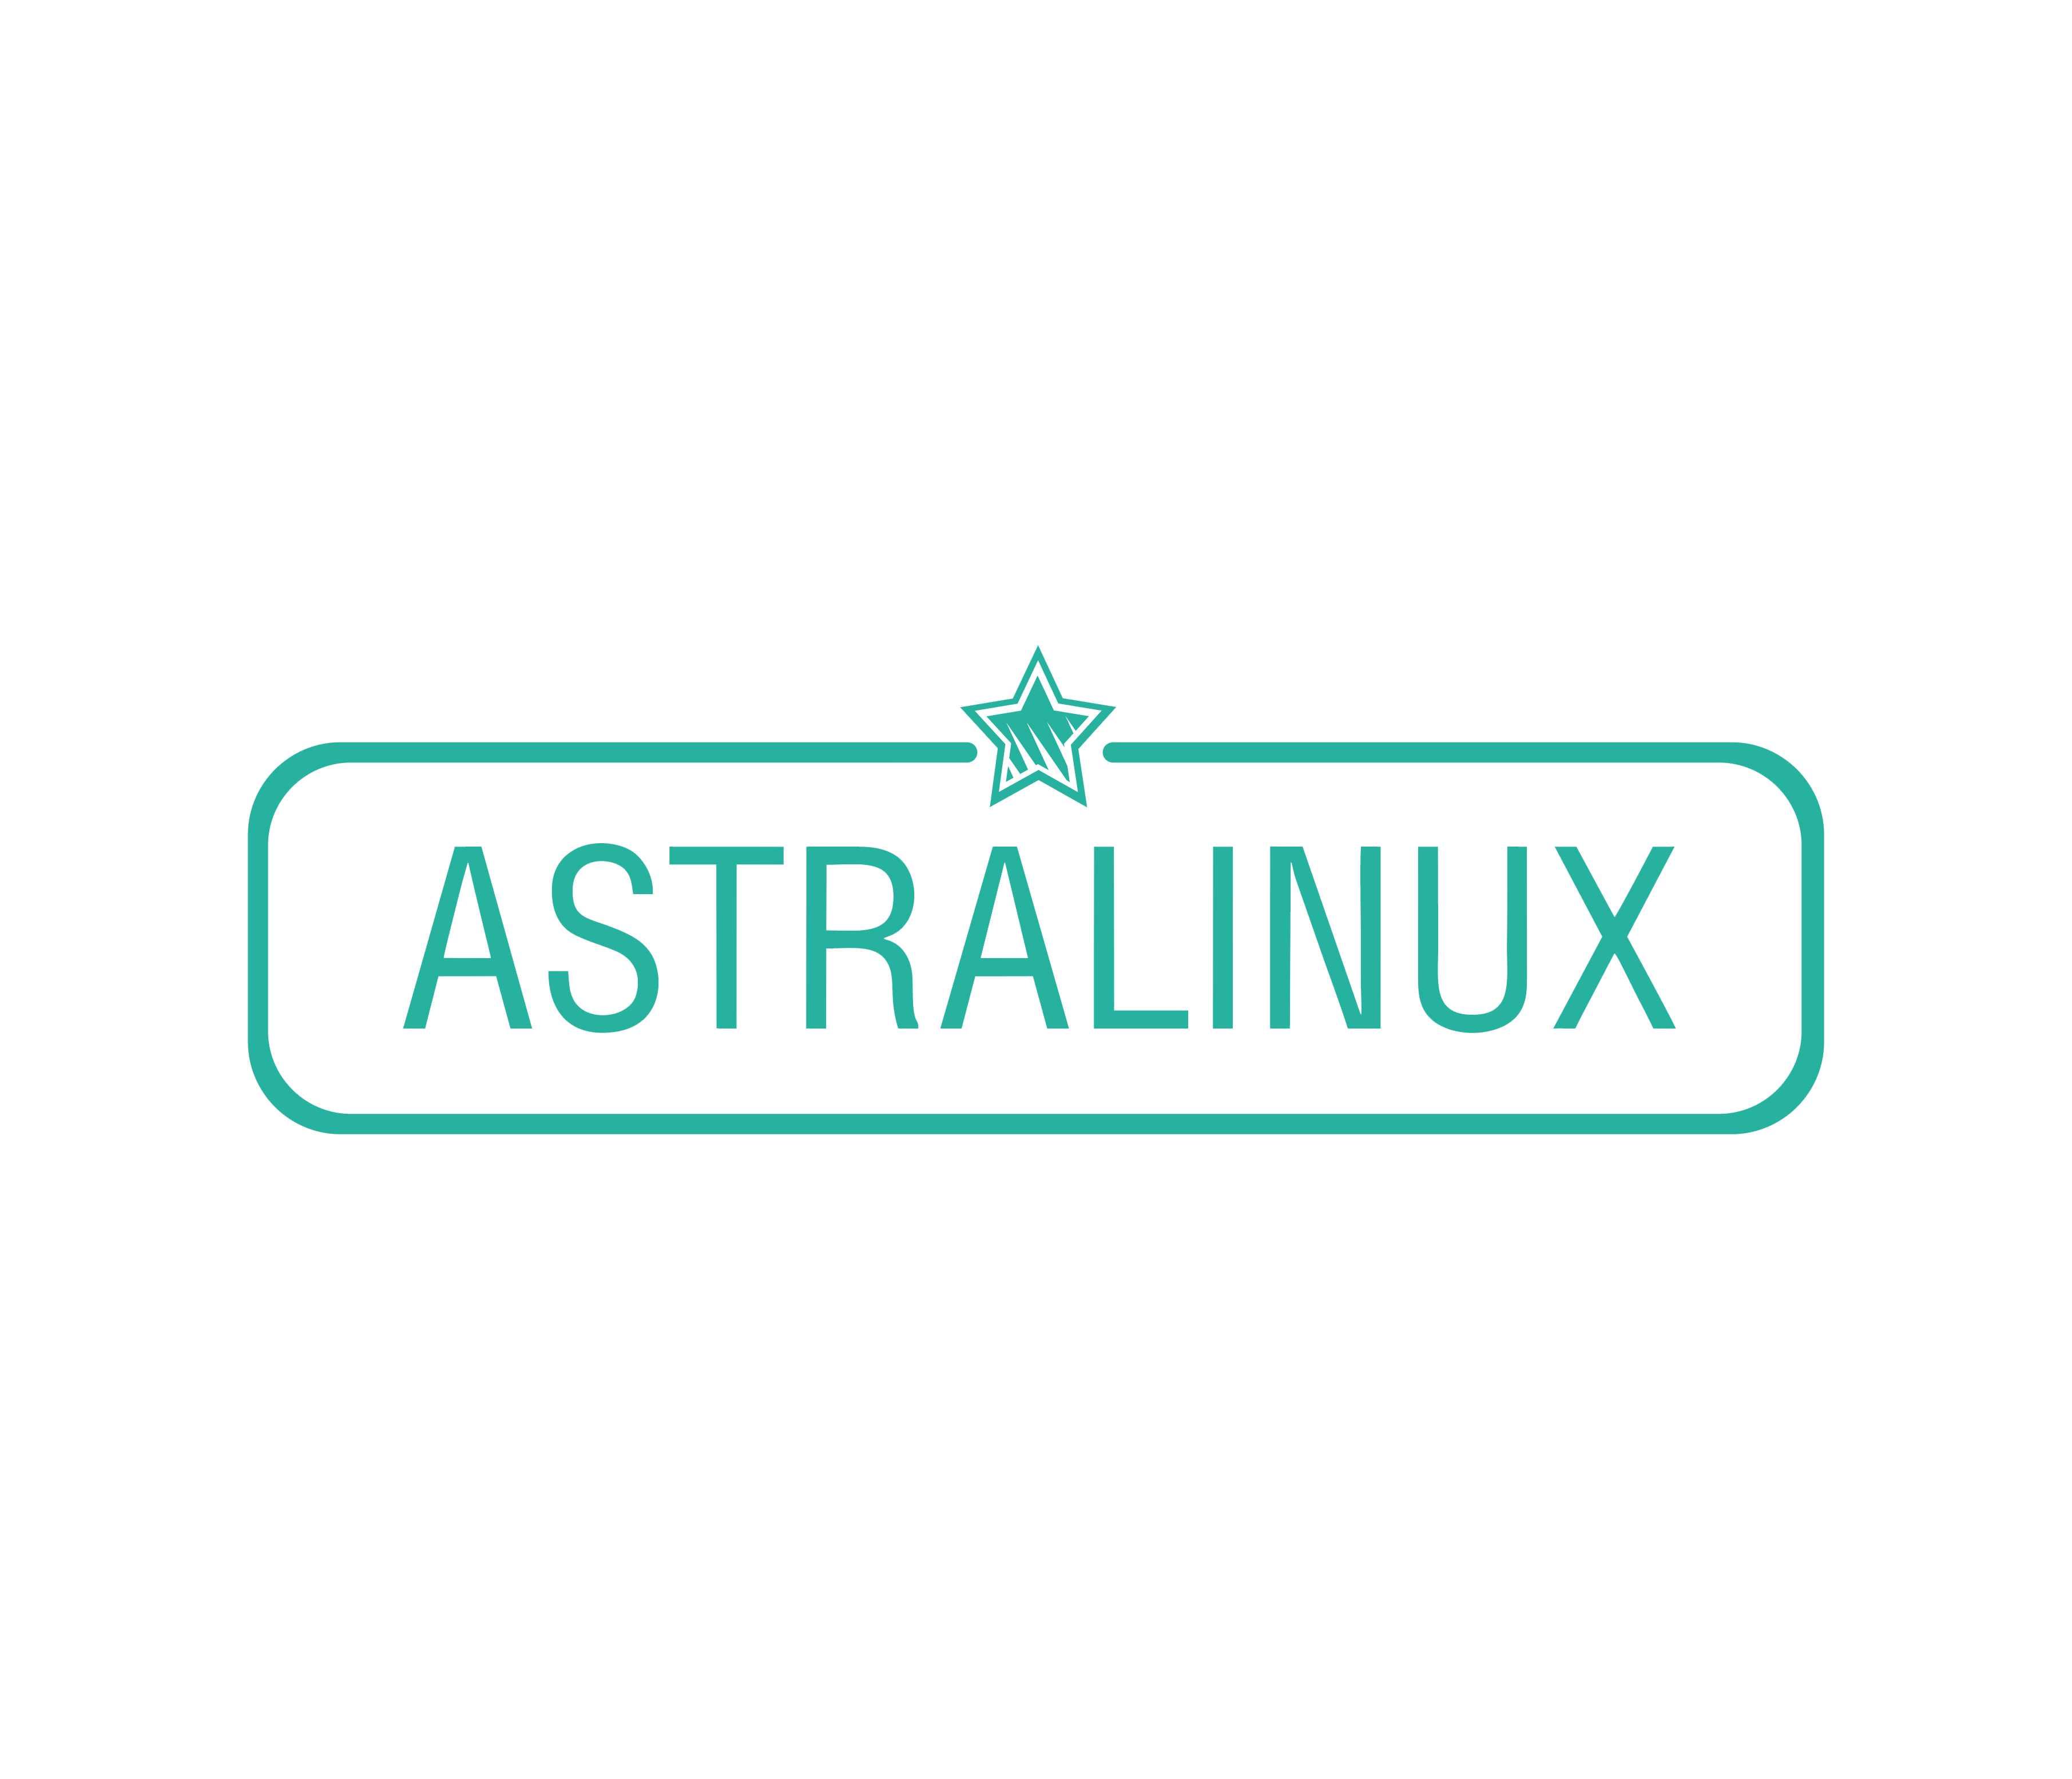 Astra Linux эмблема. Astra Linux РУСБИТЕХ. Astra Linux Special Edition logo. ОС Astra Linux.